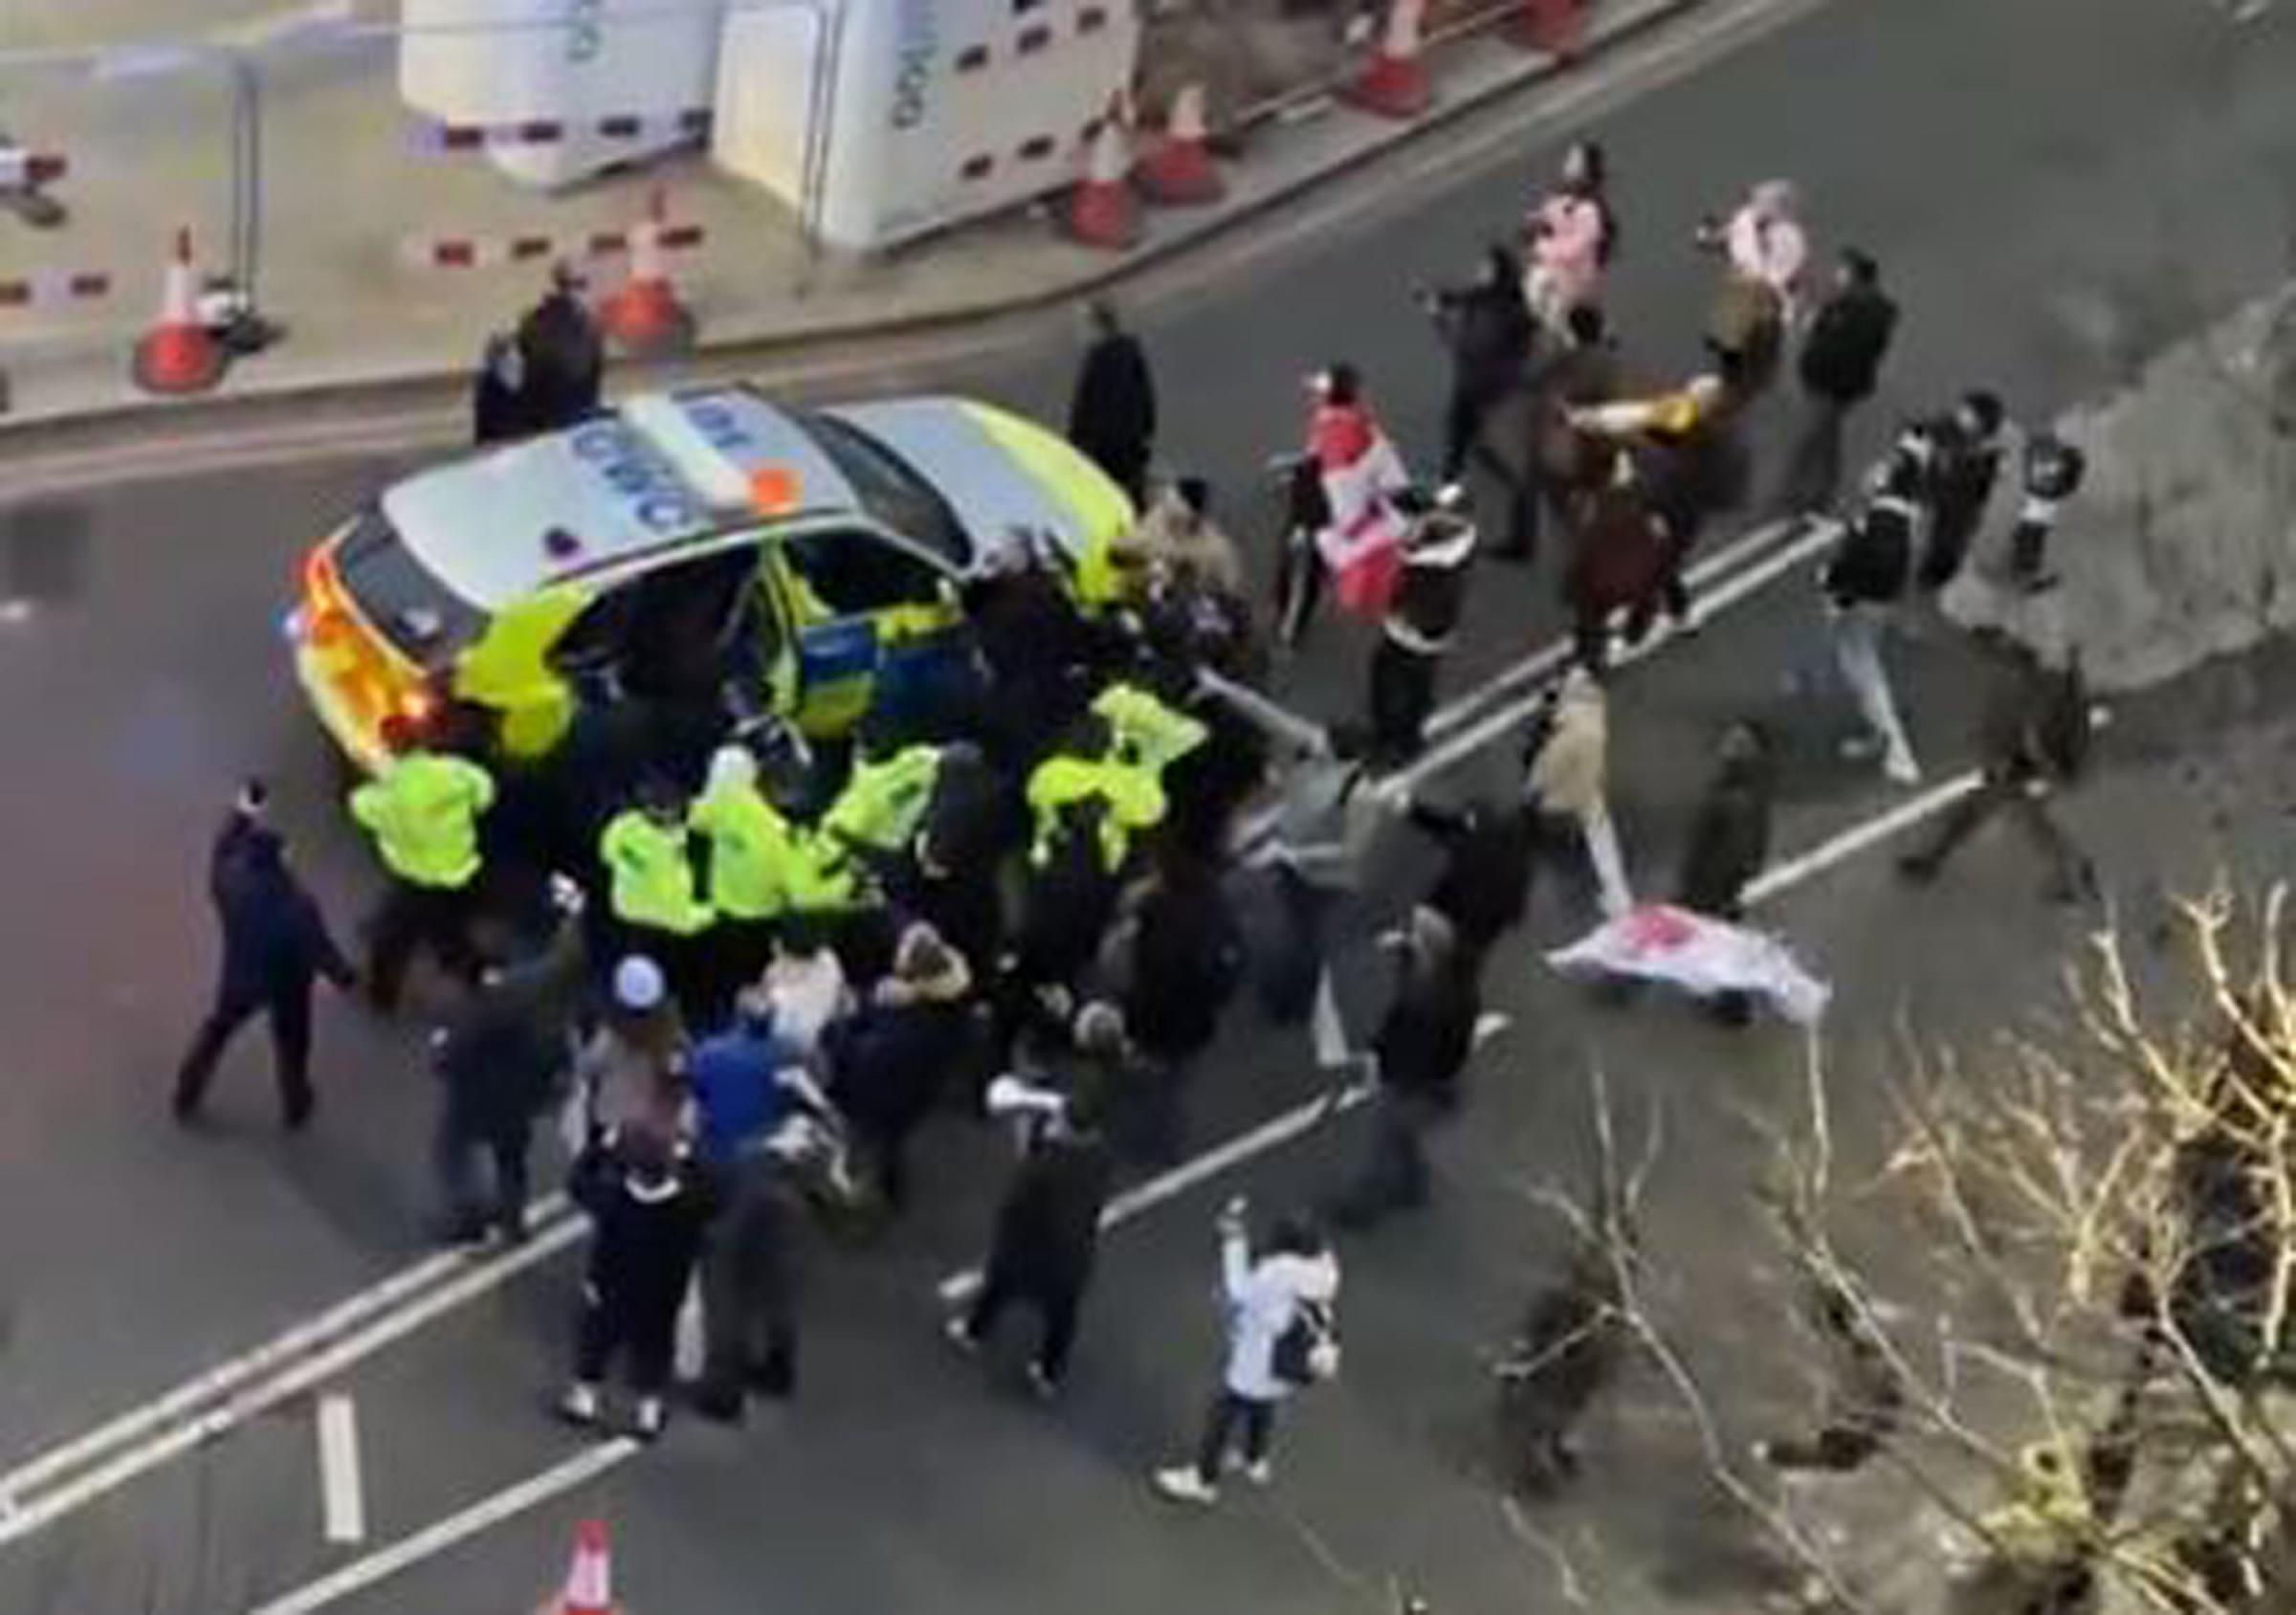 Video grab image courtesy of Conor Noon of clashes between police and protesters in Westminster as officers use a police vehicle to escort Labour leader Sir Keir Starmer to safety. 